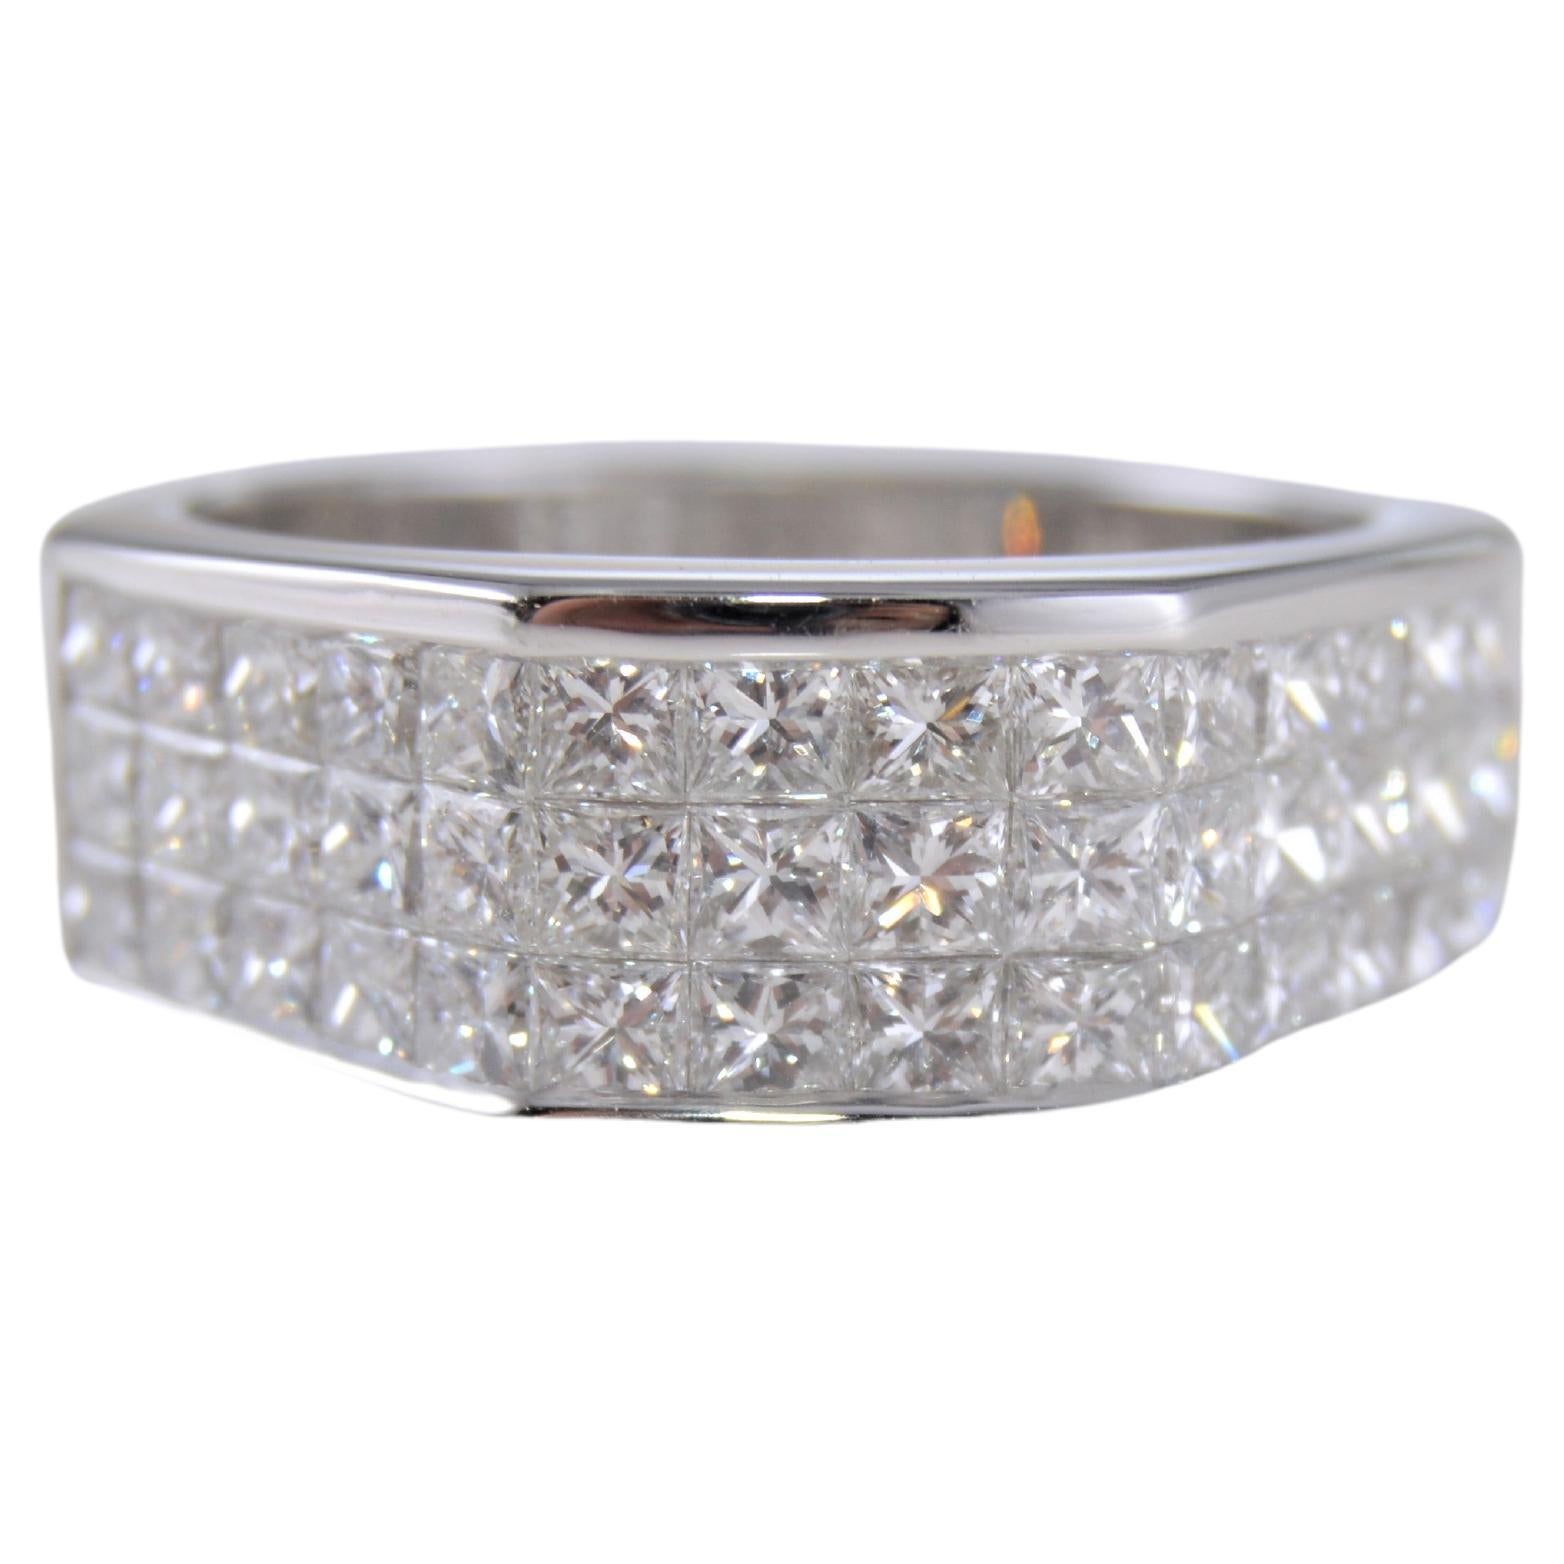 STYLE / REFERENCE: Ring
METAL / MATERIAL: 18 Karat White Gold
CIRCA / YEAR: Contemporary
DIAMOND WEIGHT: 2.89cts Total Weight
COLOR: F/G CLARITY: VS
SIZE:  8 3/4

This architecturally inspired Diamond ring is beautifully hand crafted in bright and